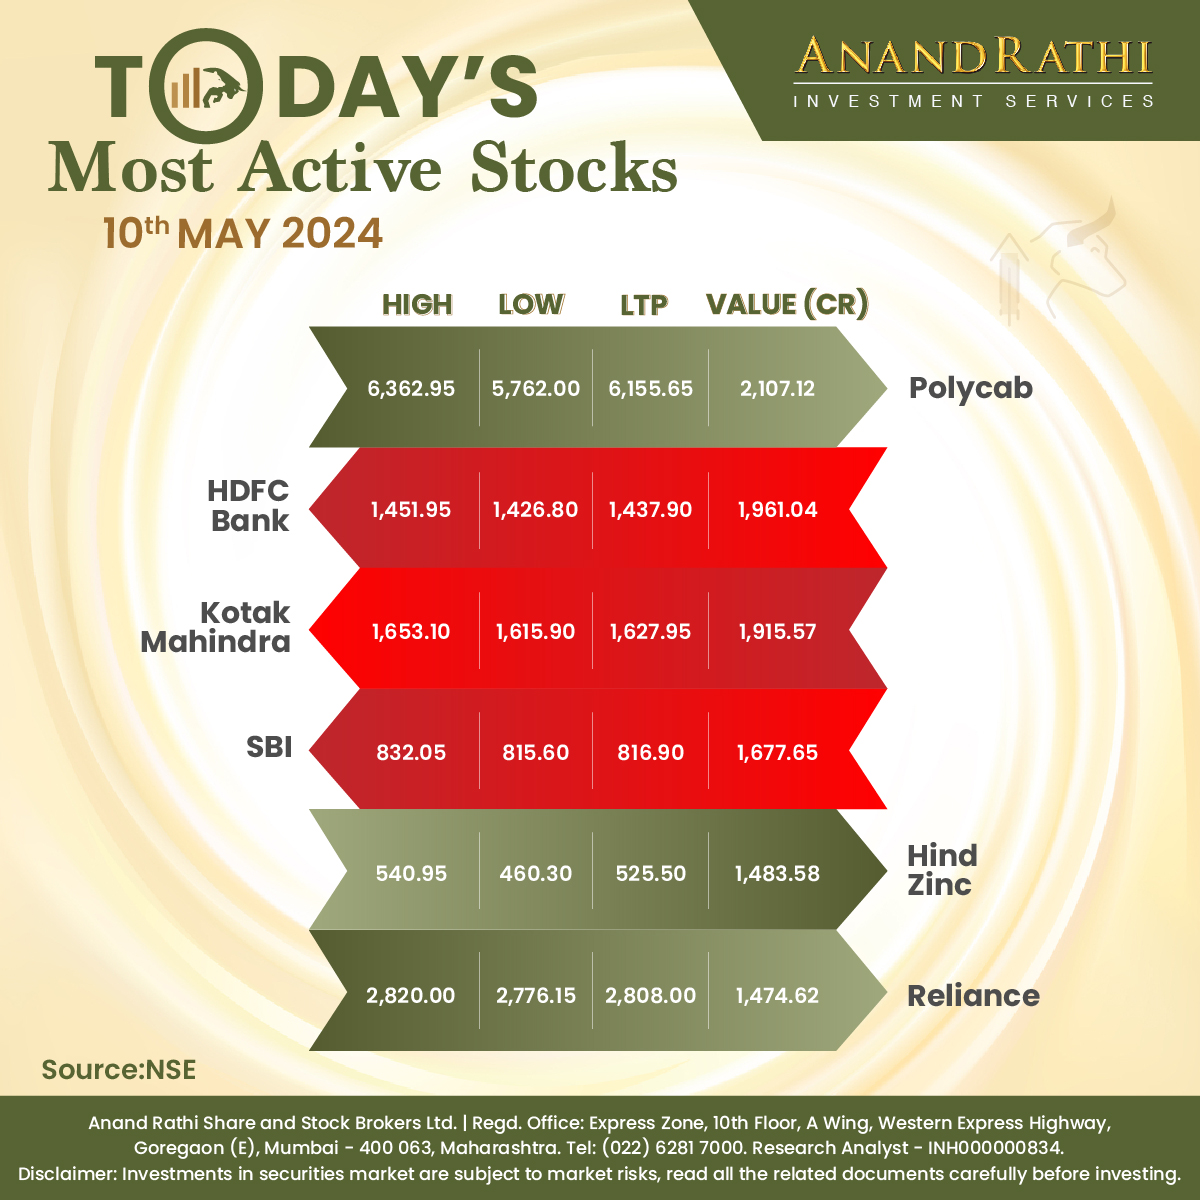 Take a glimpse of Today’s Most Active Stocks 

Disclaimer - bit.ly/ARDisclaimerRe…
#AnandRathi #Stockbroker #stockmarket #stocks #investing #trading #investment #money #finance #nifty